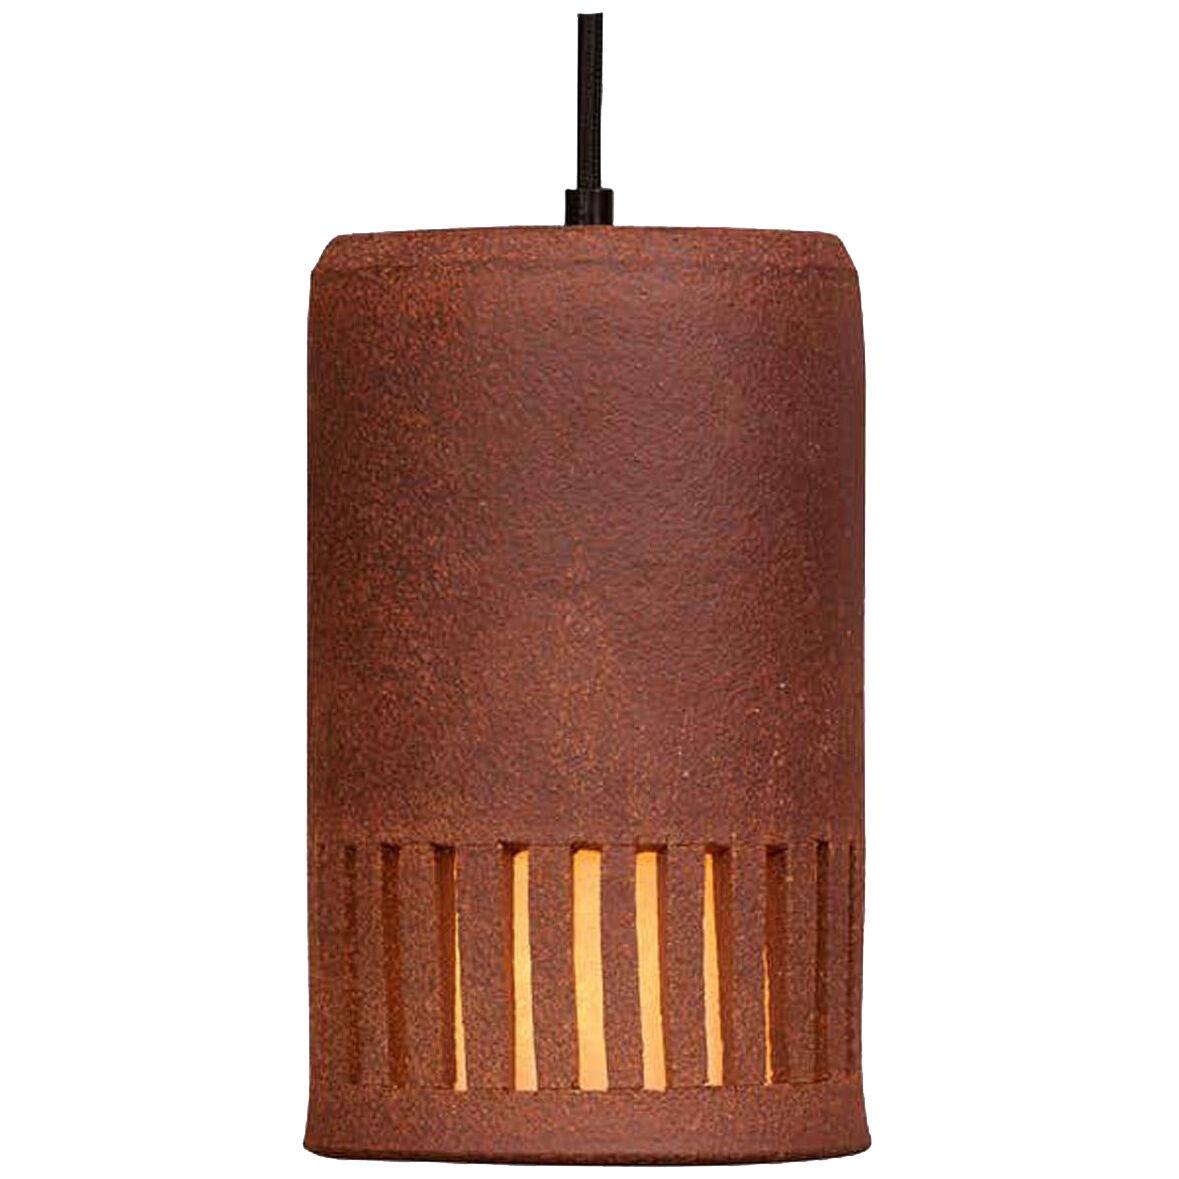 Clay Outdoor Hanging Light HL 20 by Brent J. Bennett, US, 2019